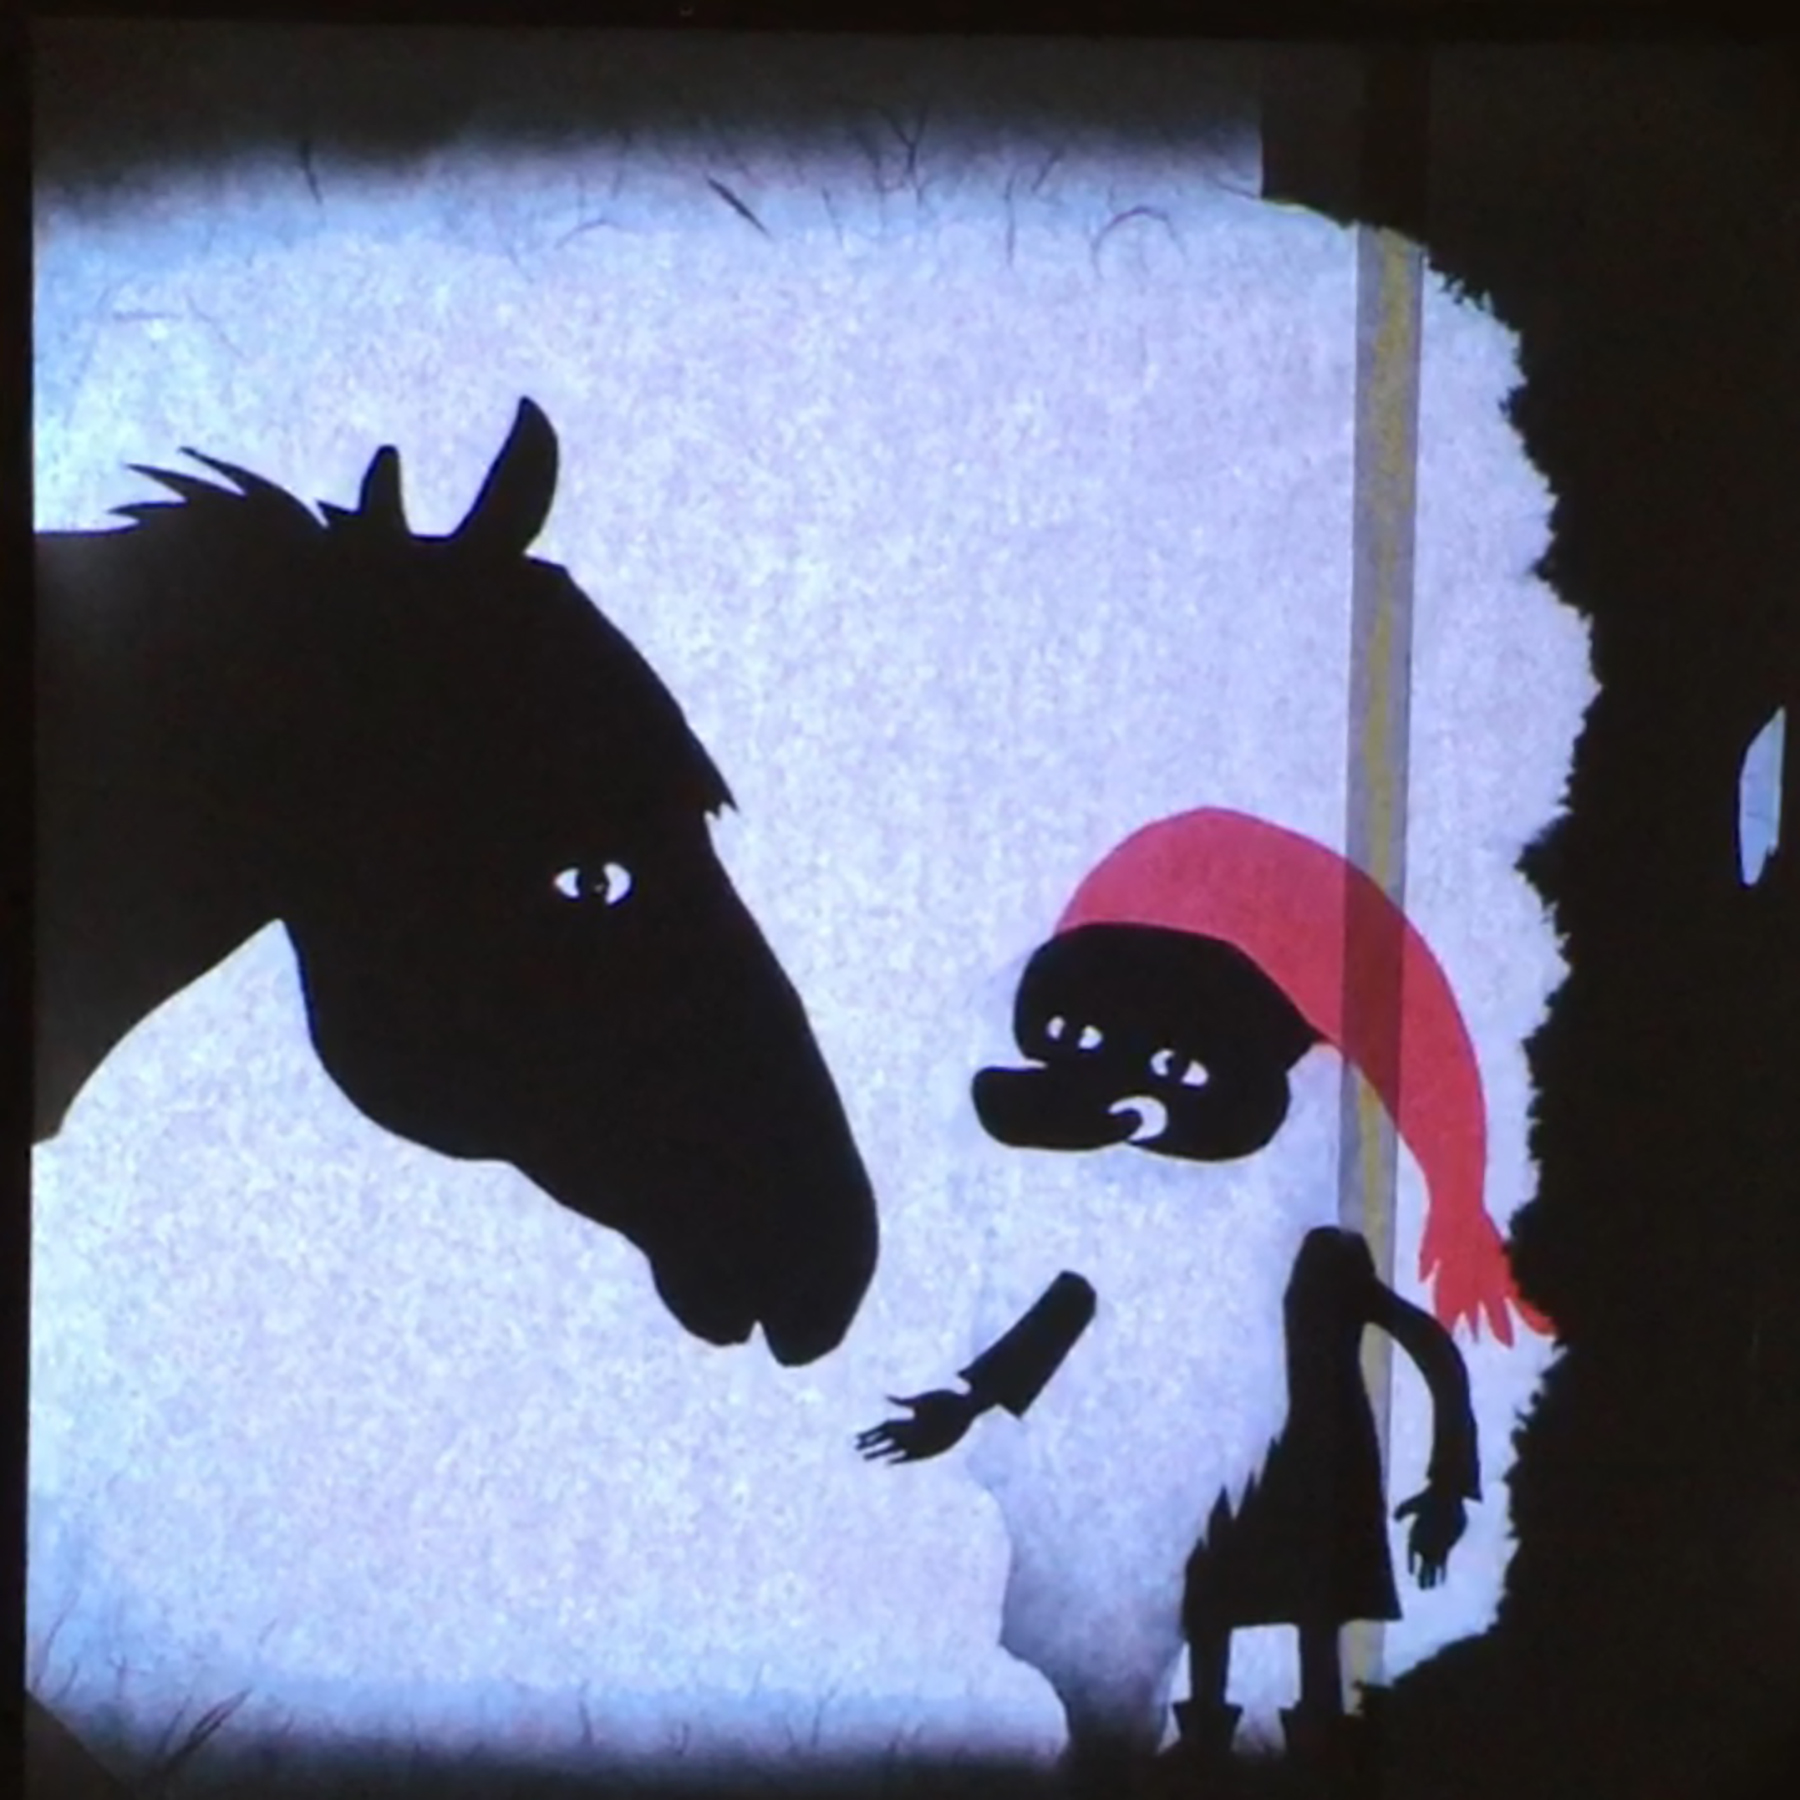 image of shadow horse with gnome